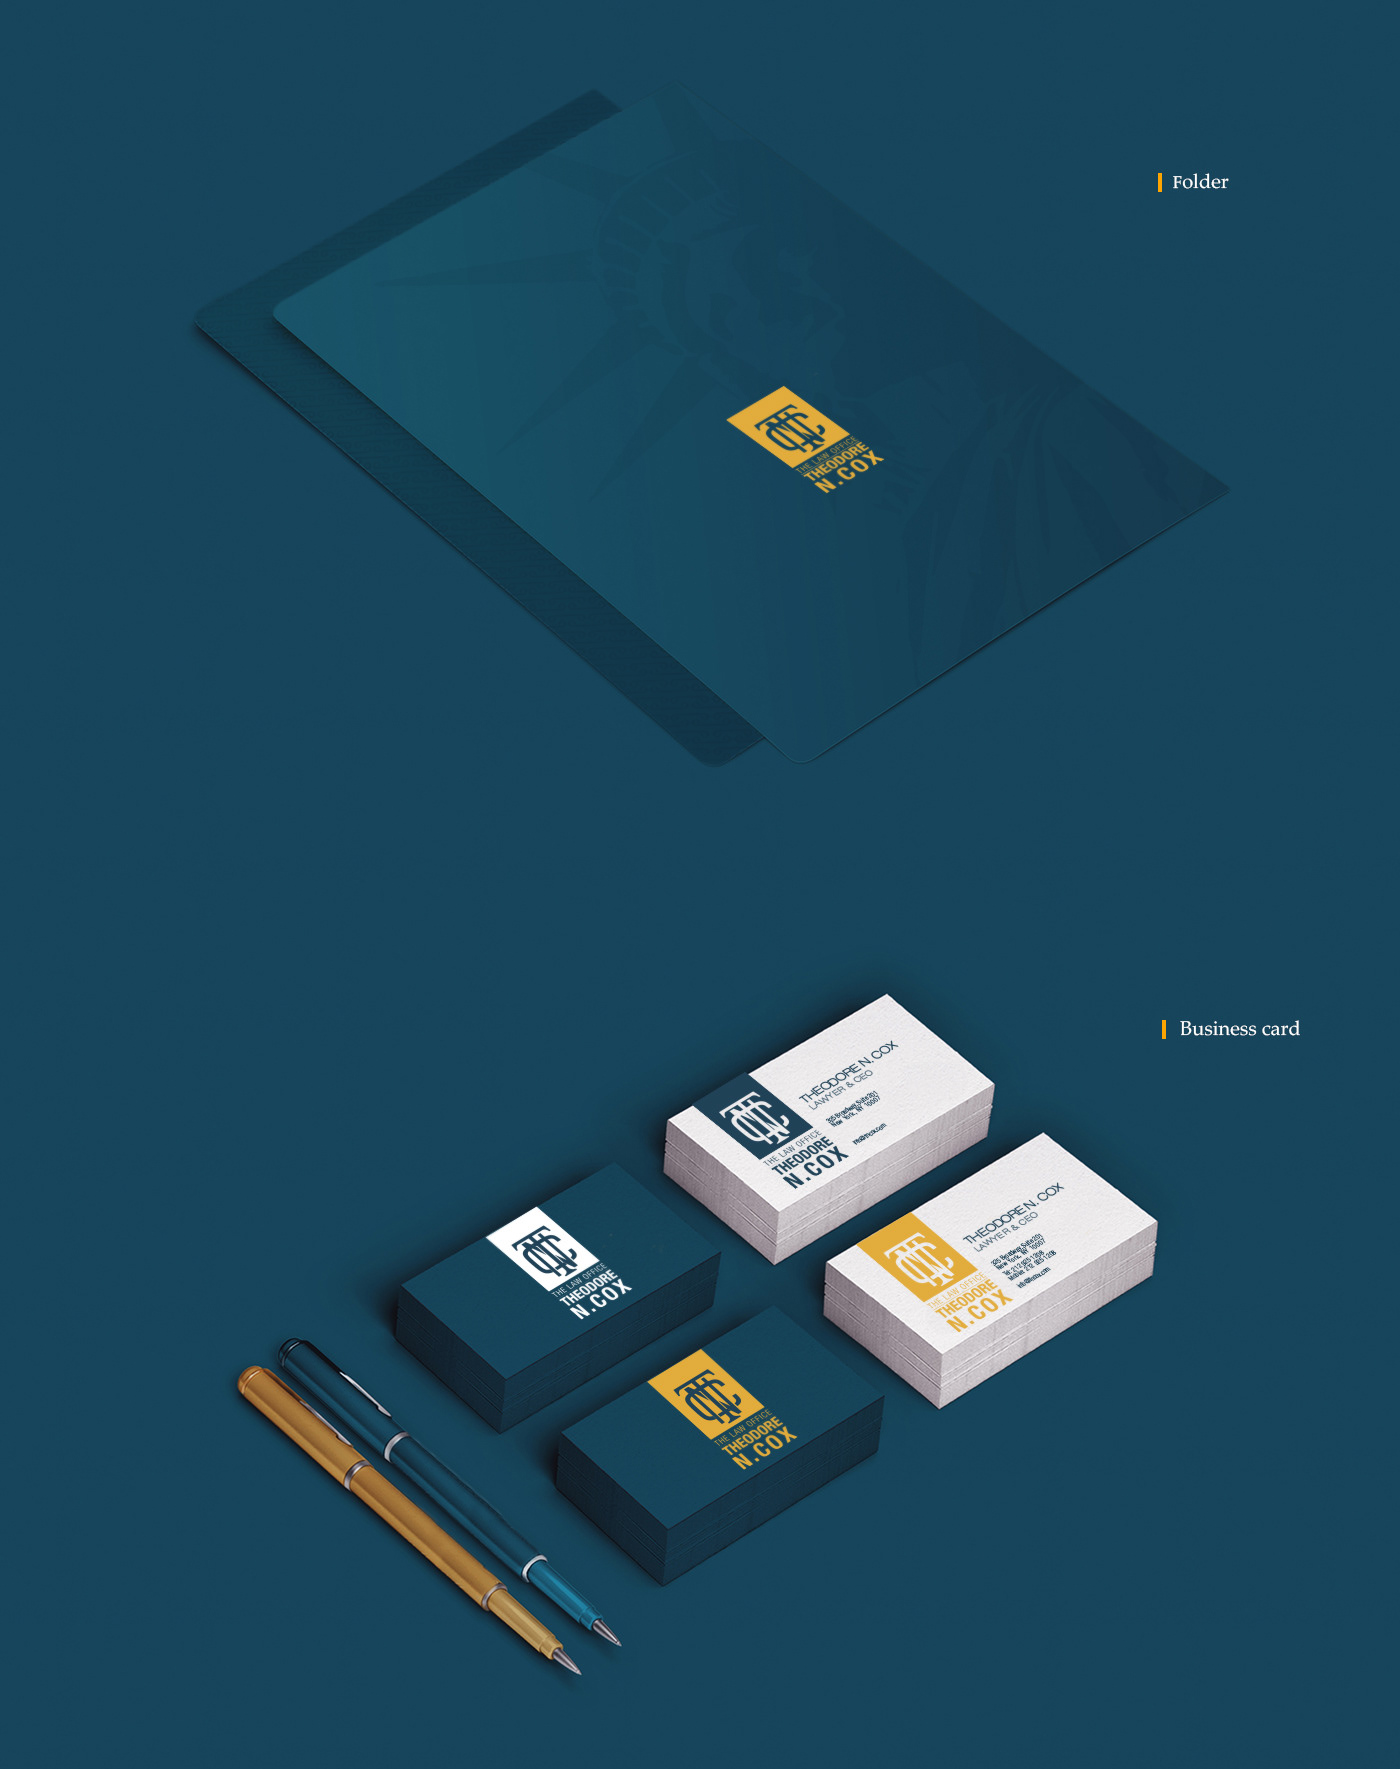 law firm Immigration legal service monogram Corporate Identity